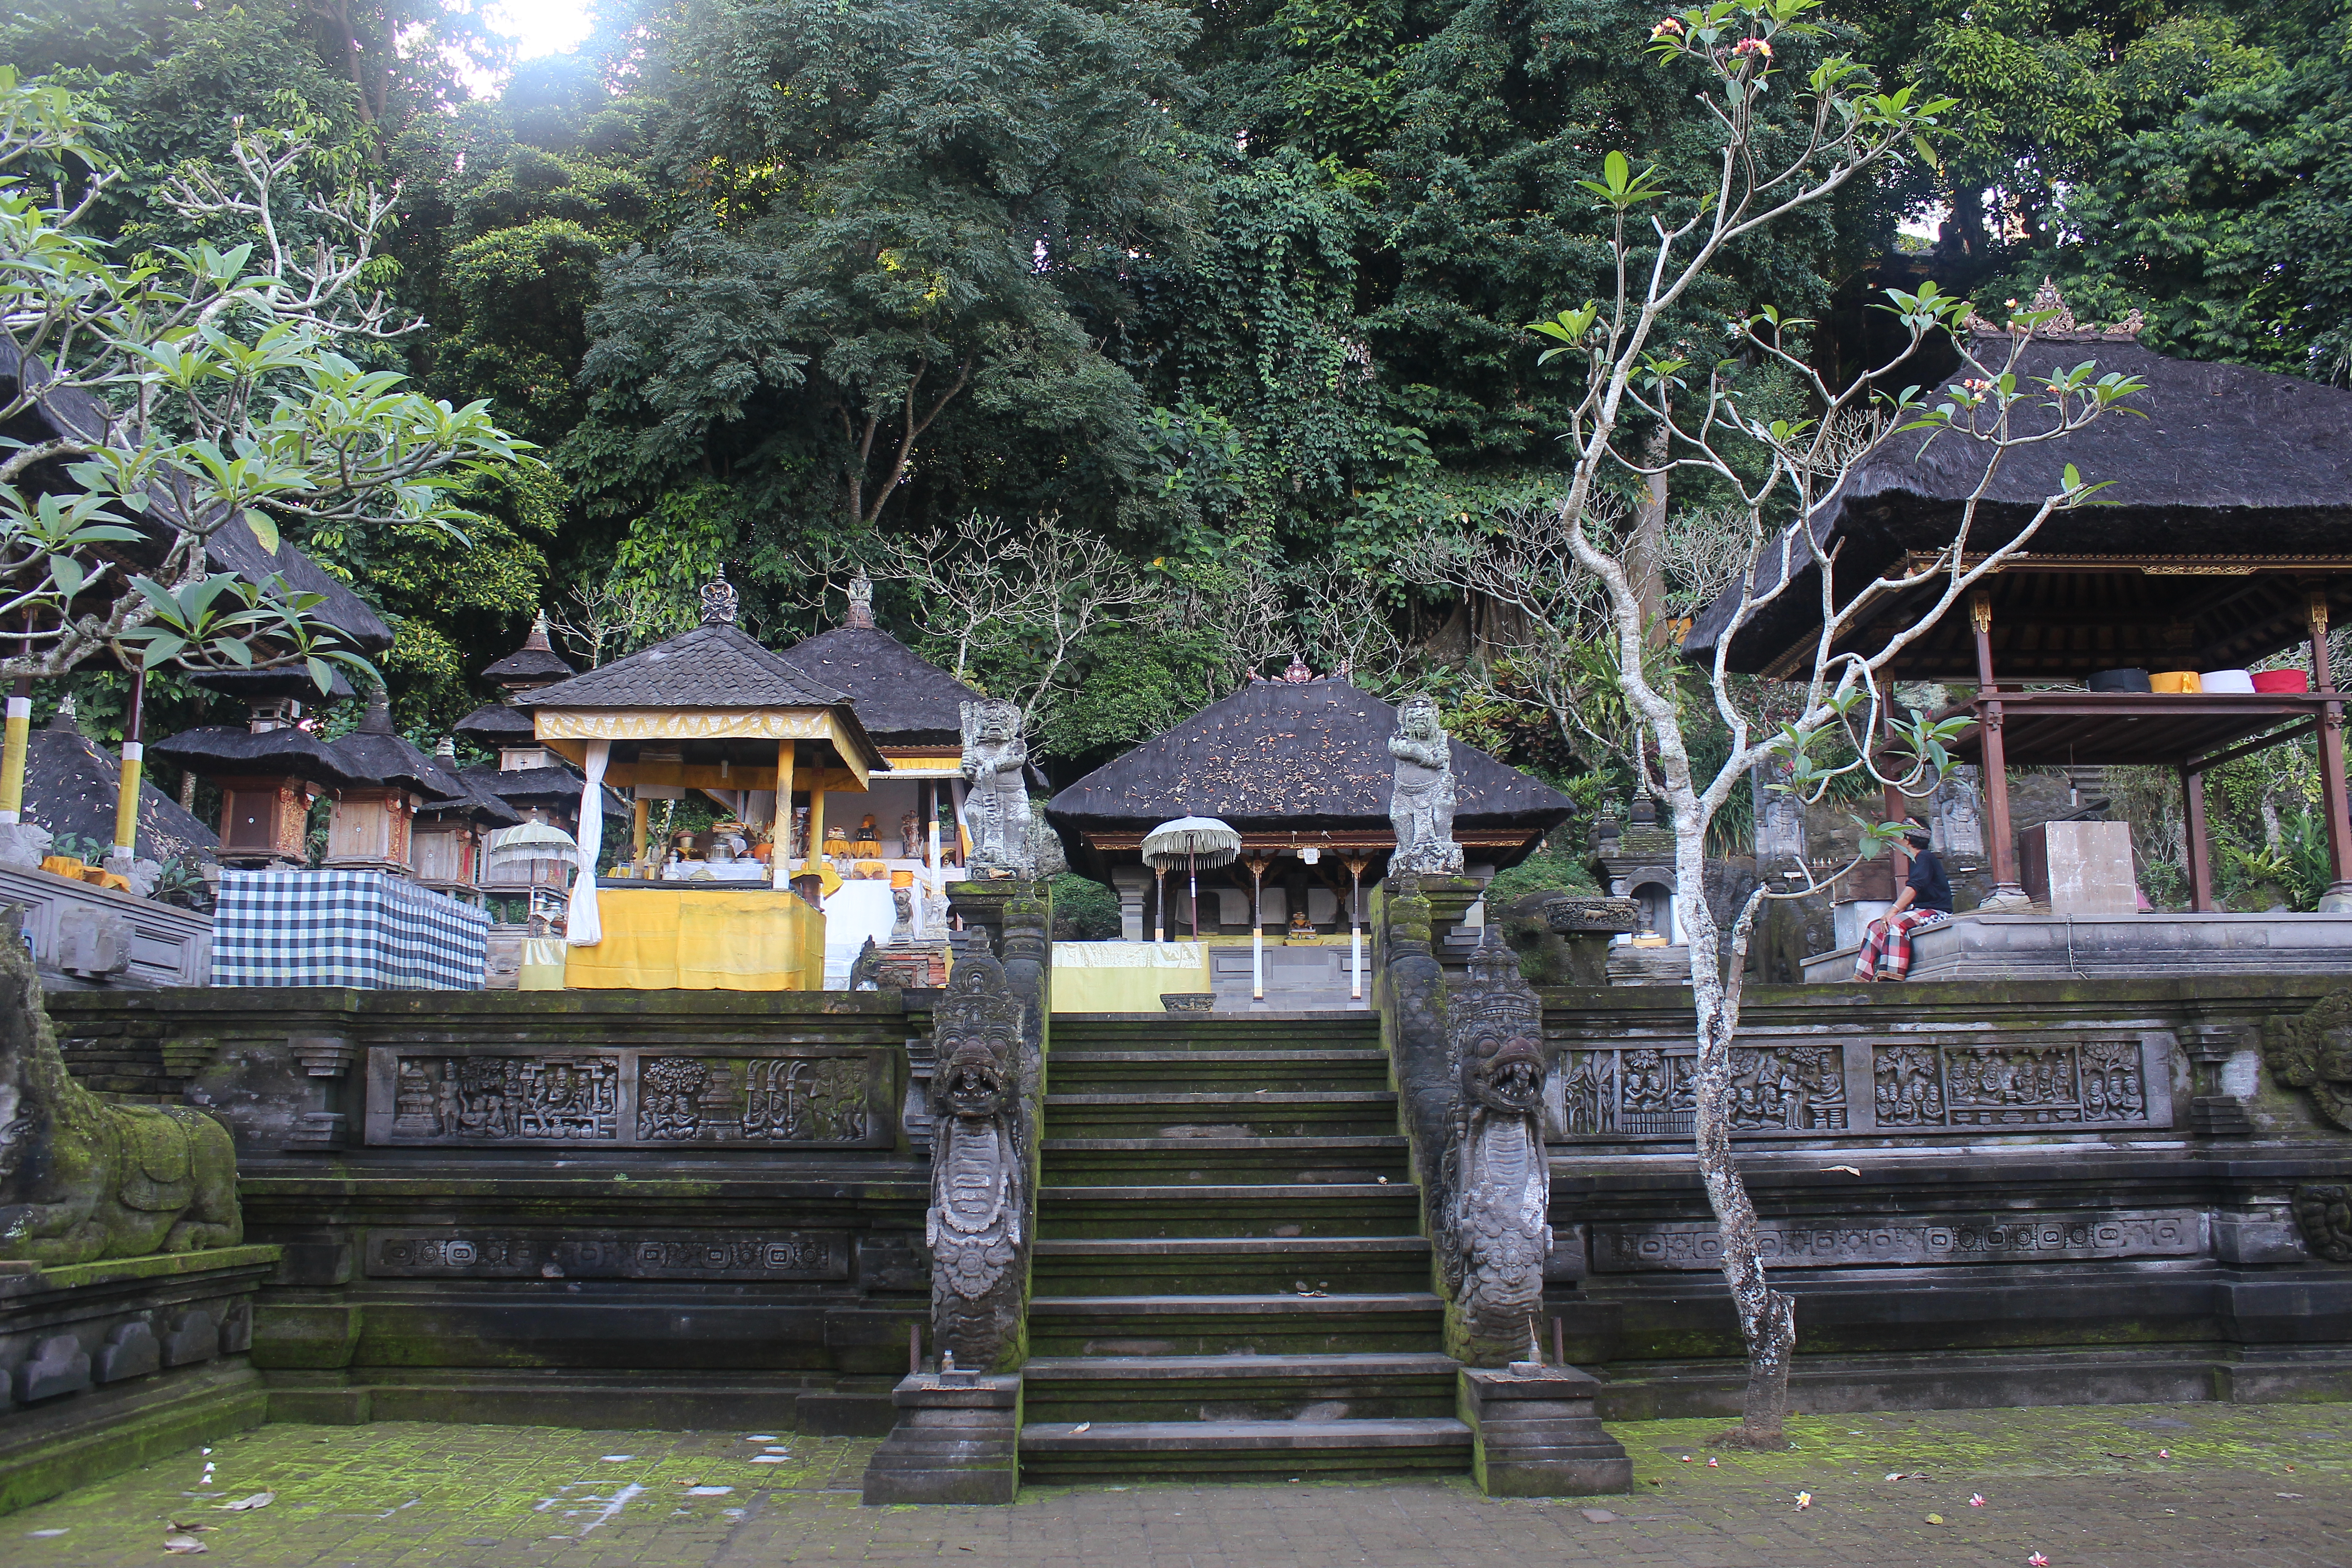 View up towards large temple complex